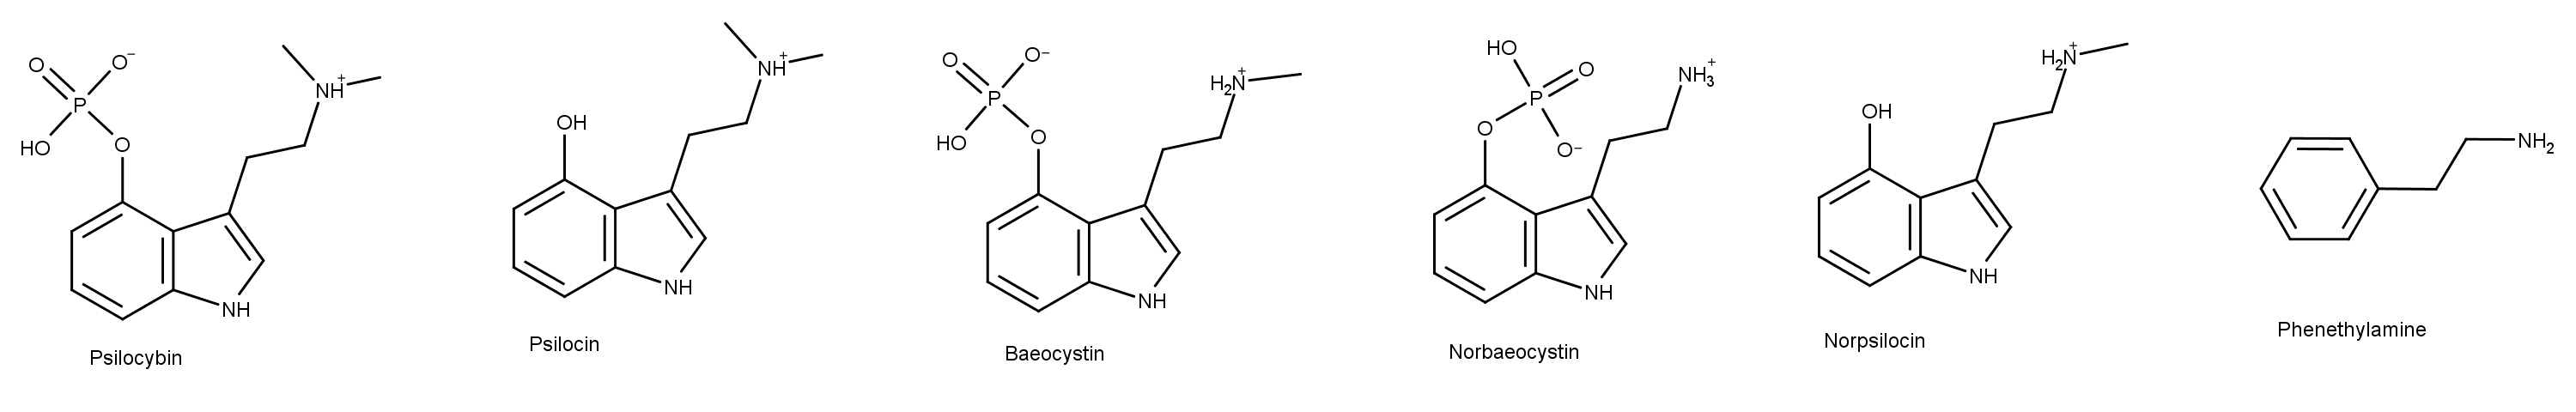 Chemical structures of compounds present in psychedelic psilocybin mushrooms.